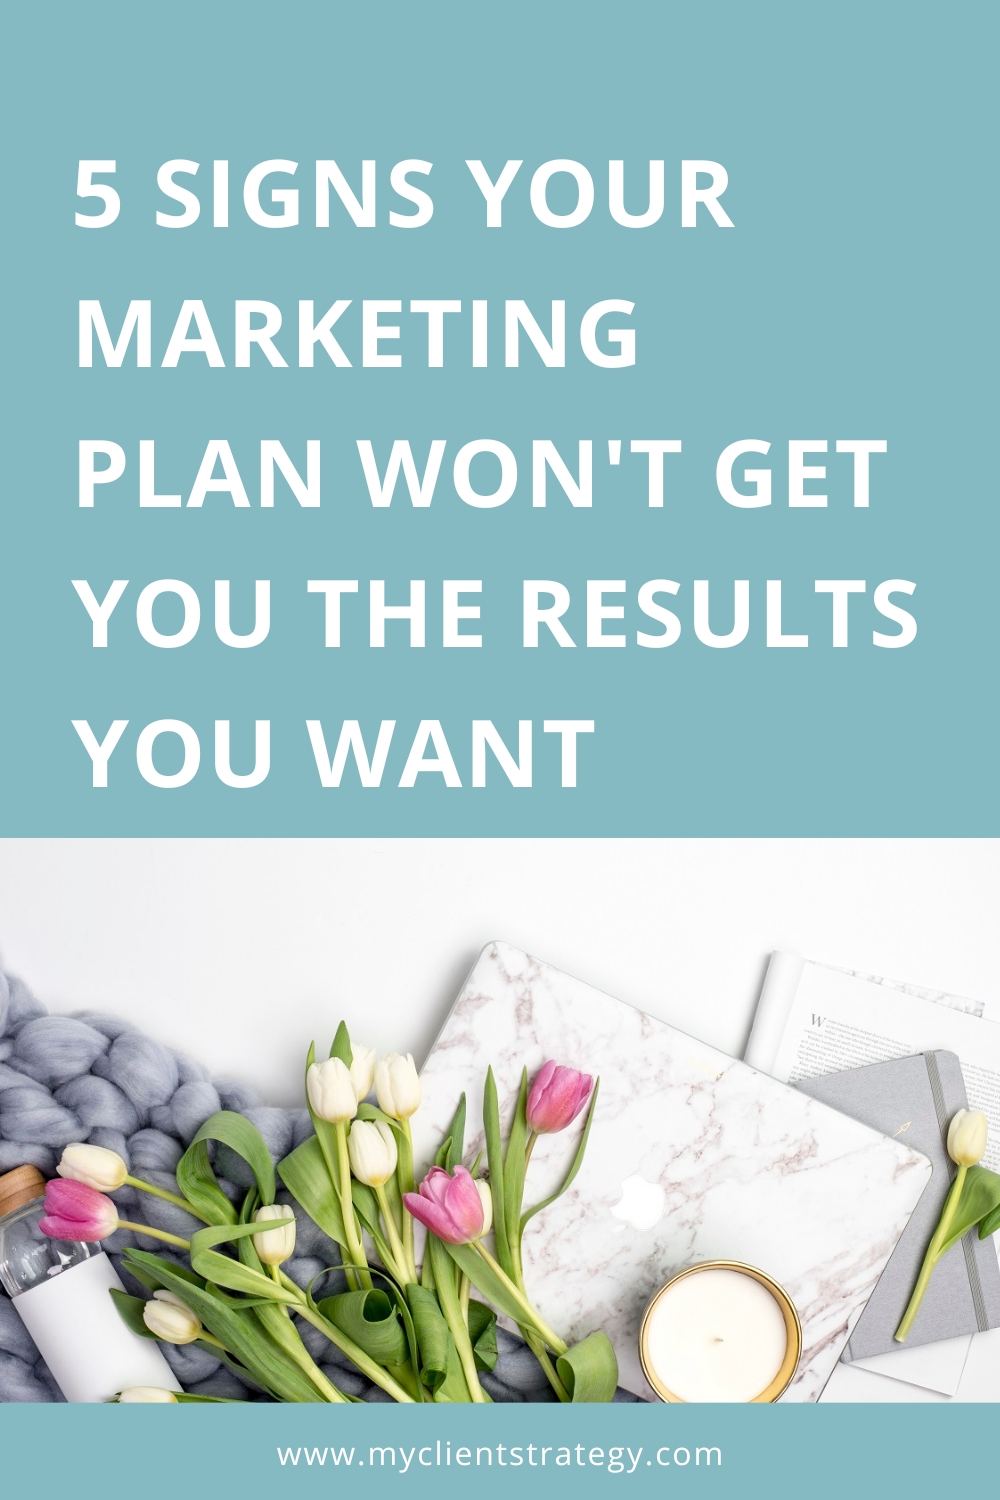 5 Signs your marketing plan won't get you the results you want